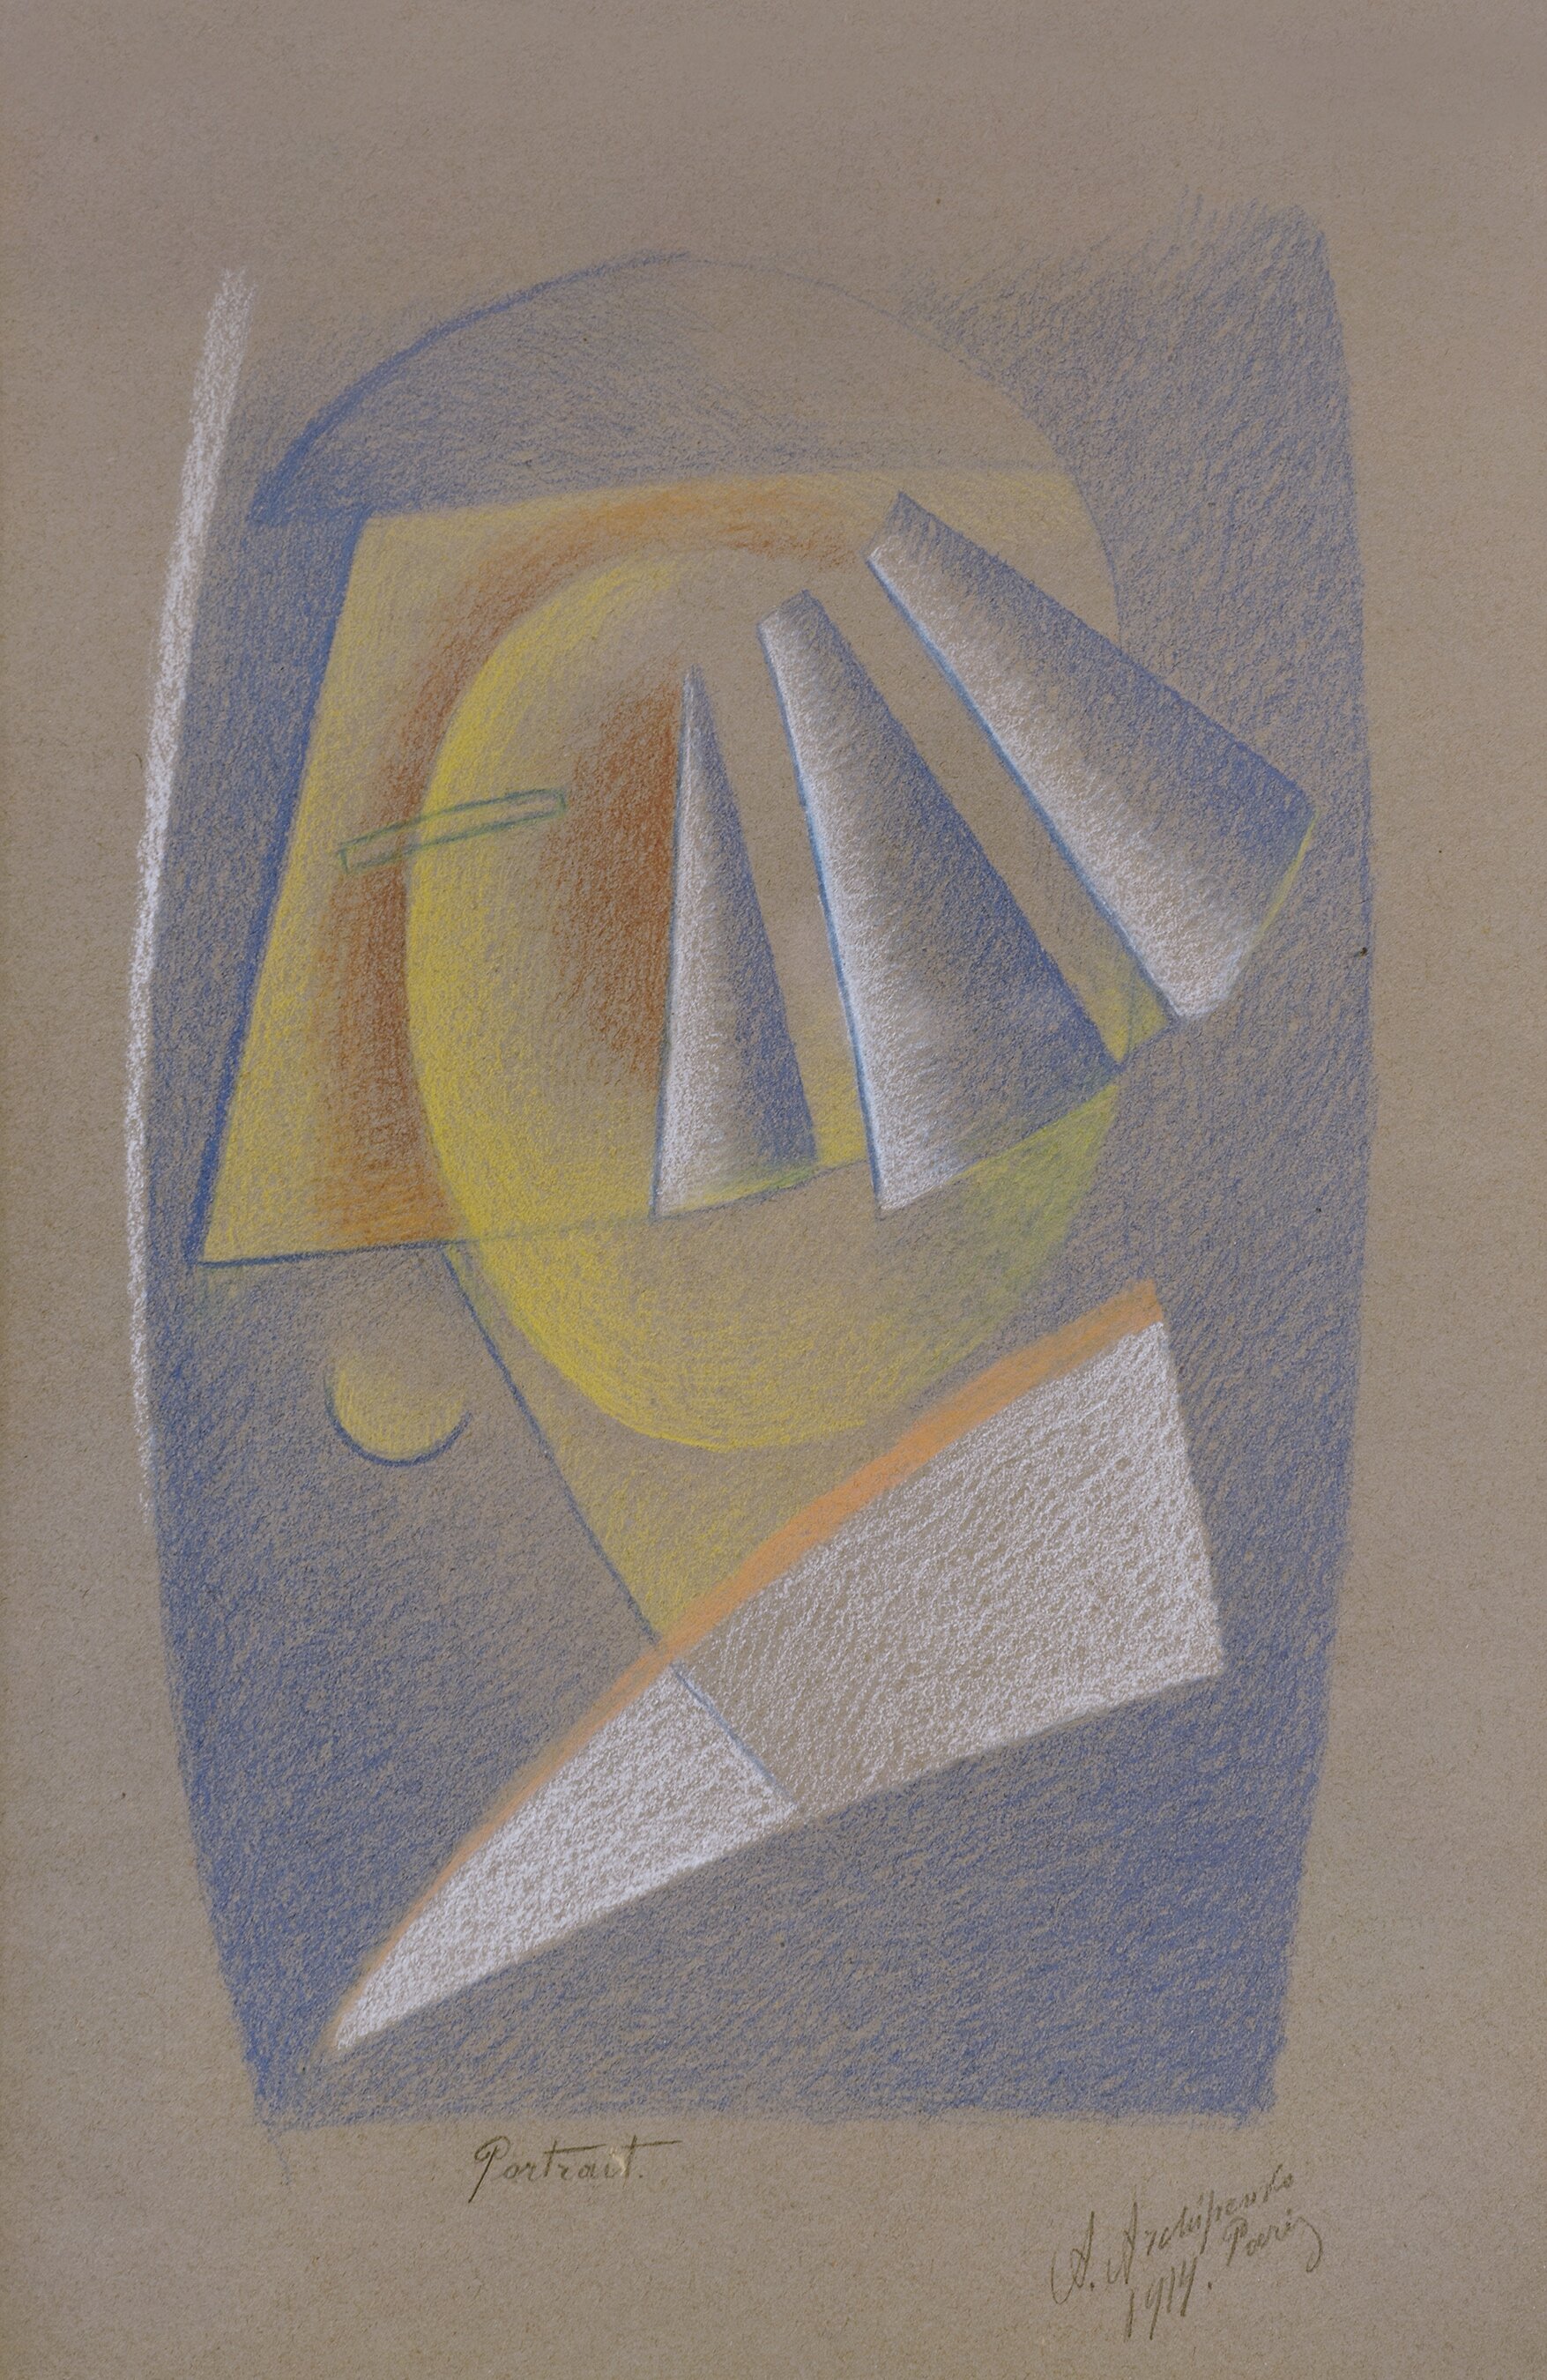 Geometric abstract side bust in blue and yellow with orange and white highlights